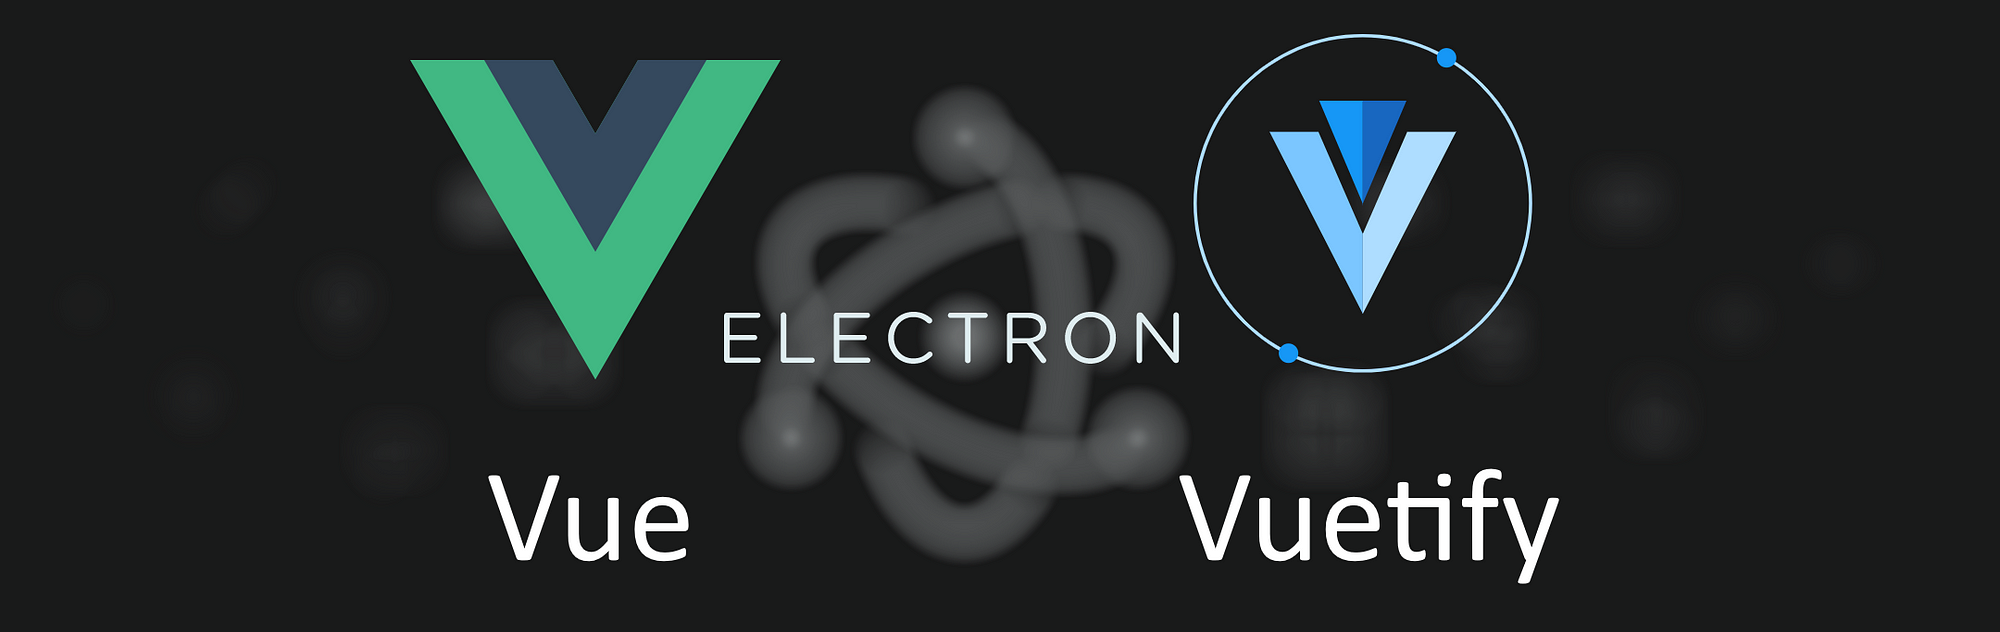 Simple steps to create an Electron app with Vue.js and Vuetify | ITNEXT